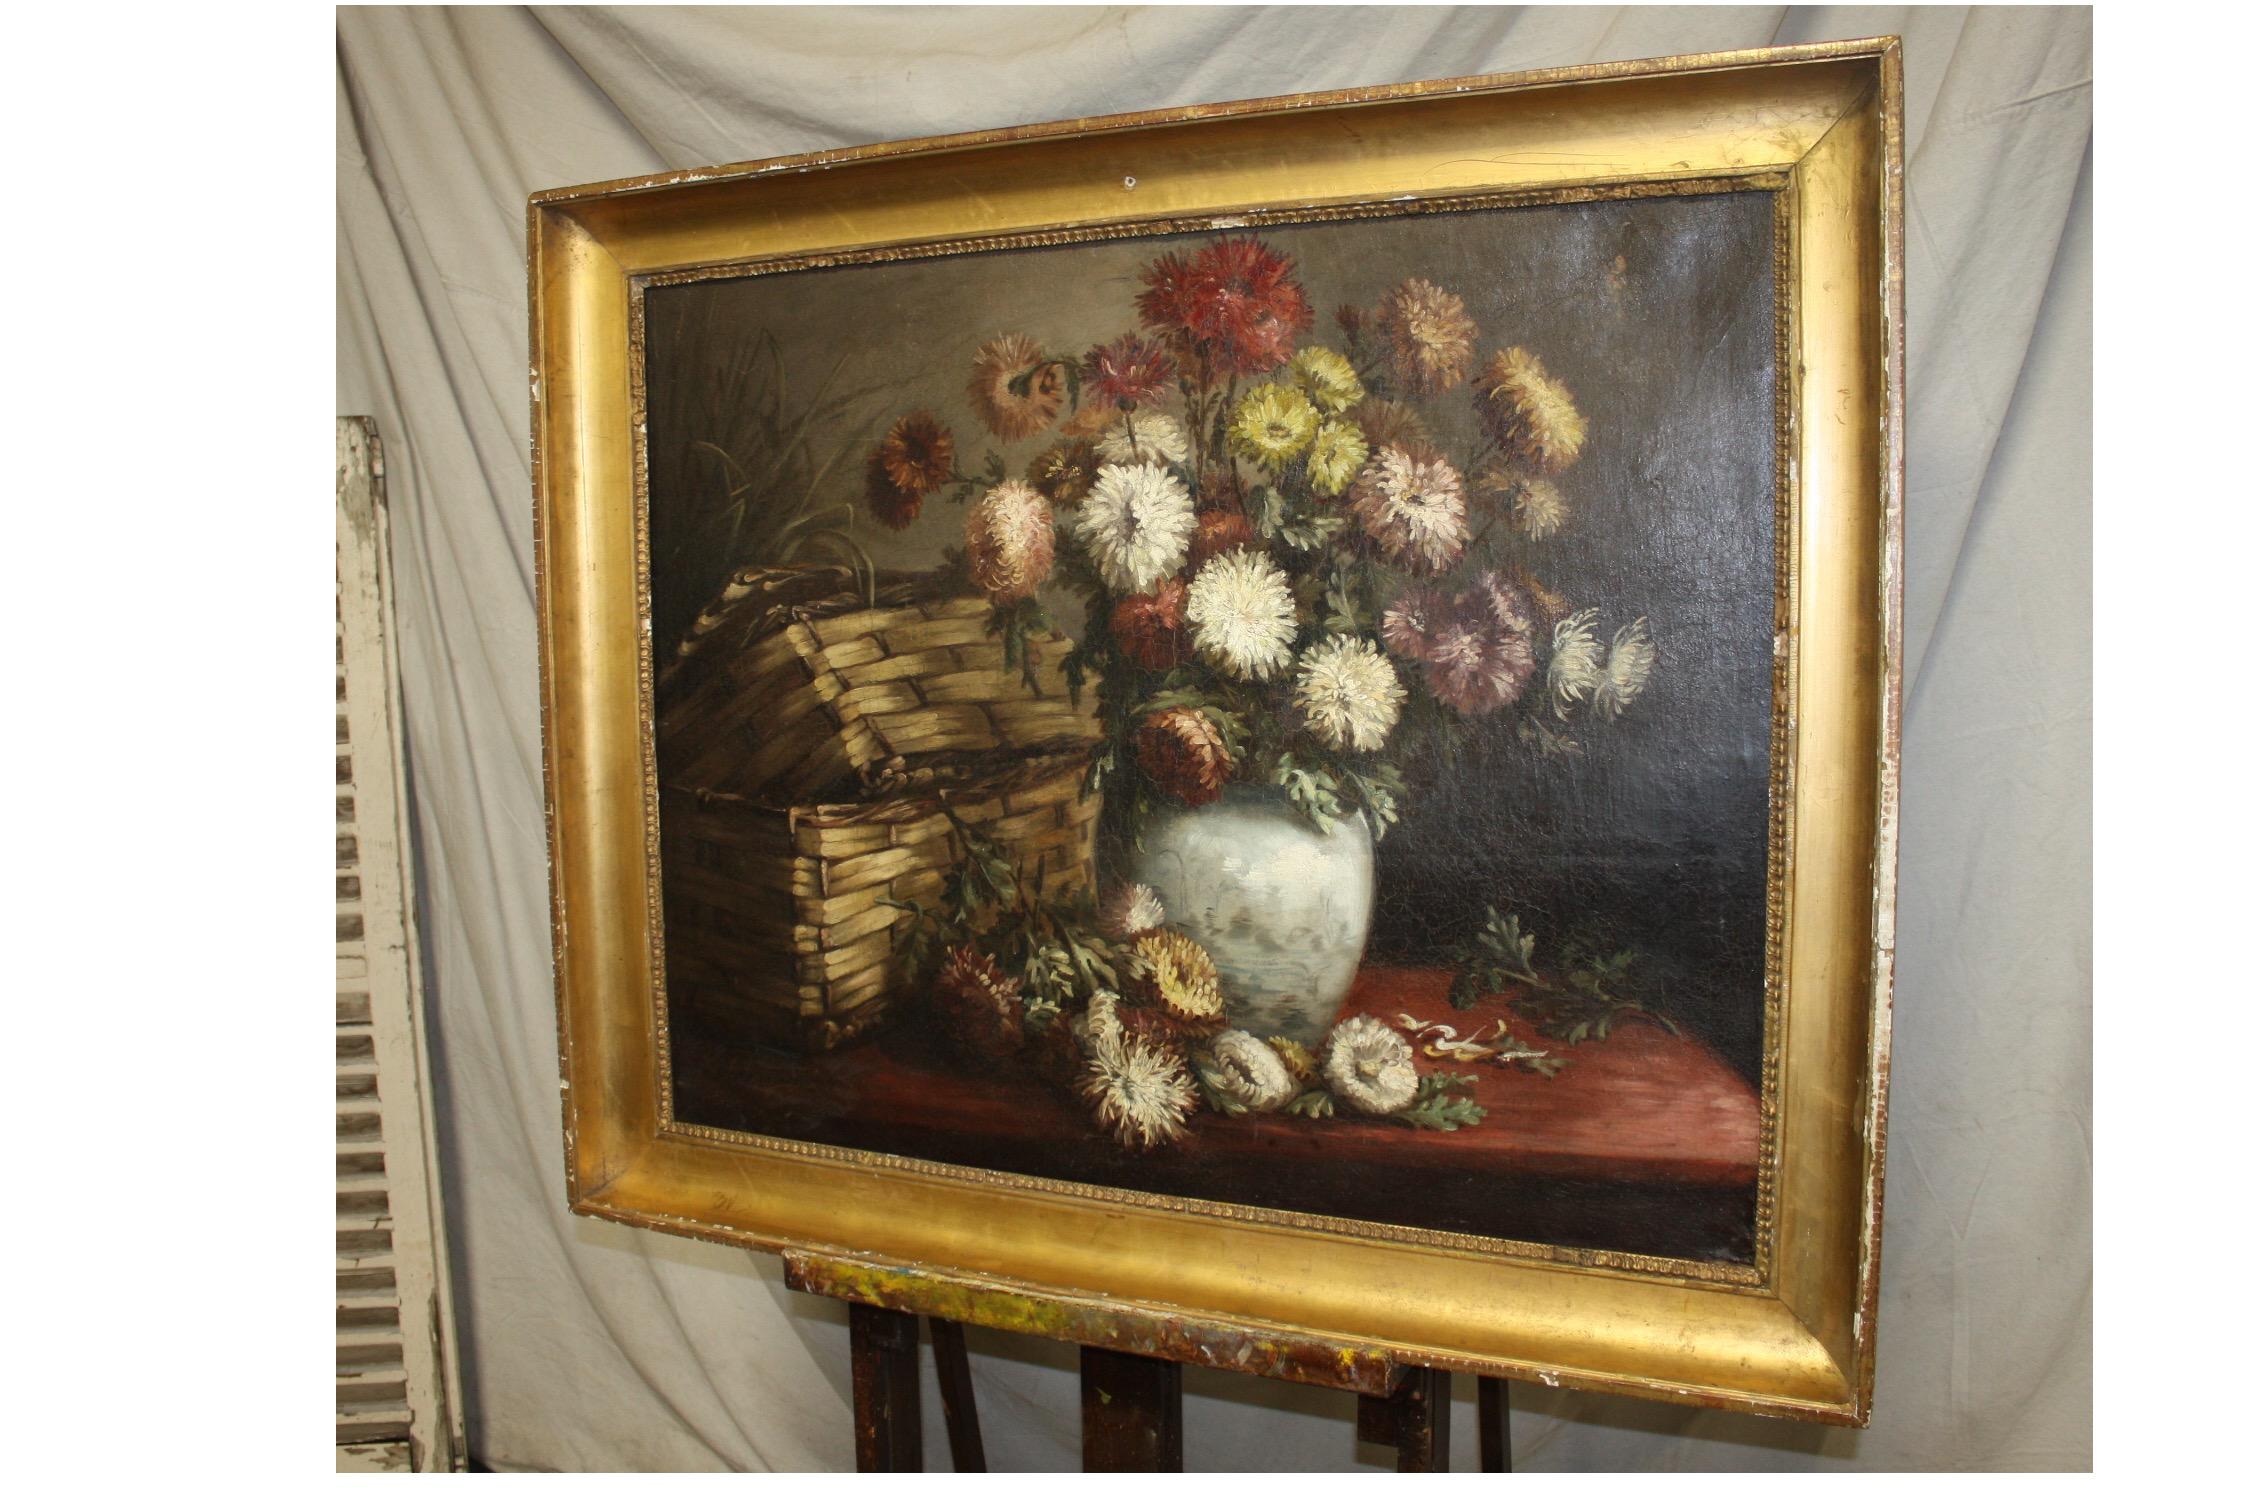 Beautiful 19th century, French oil on canvas.